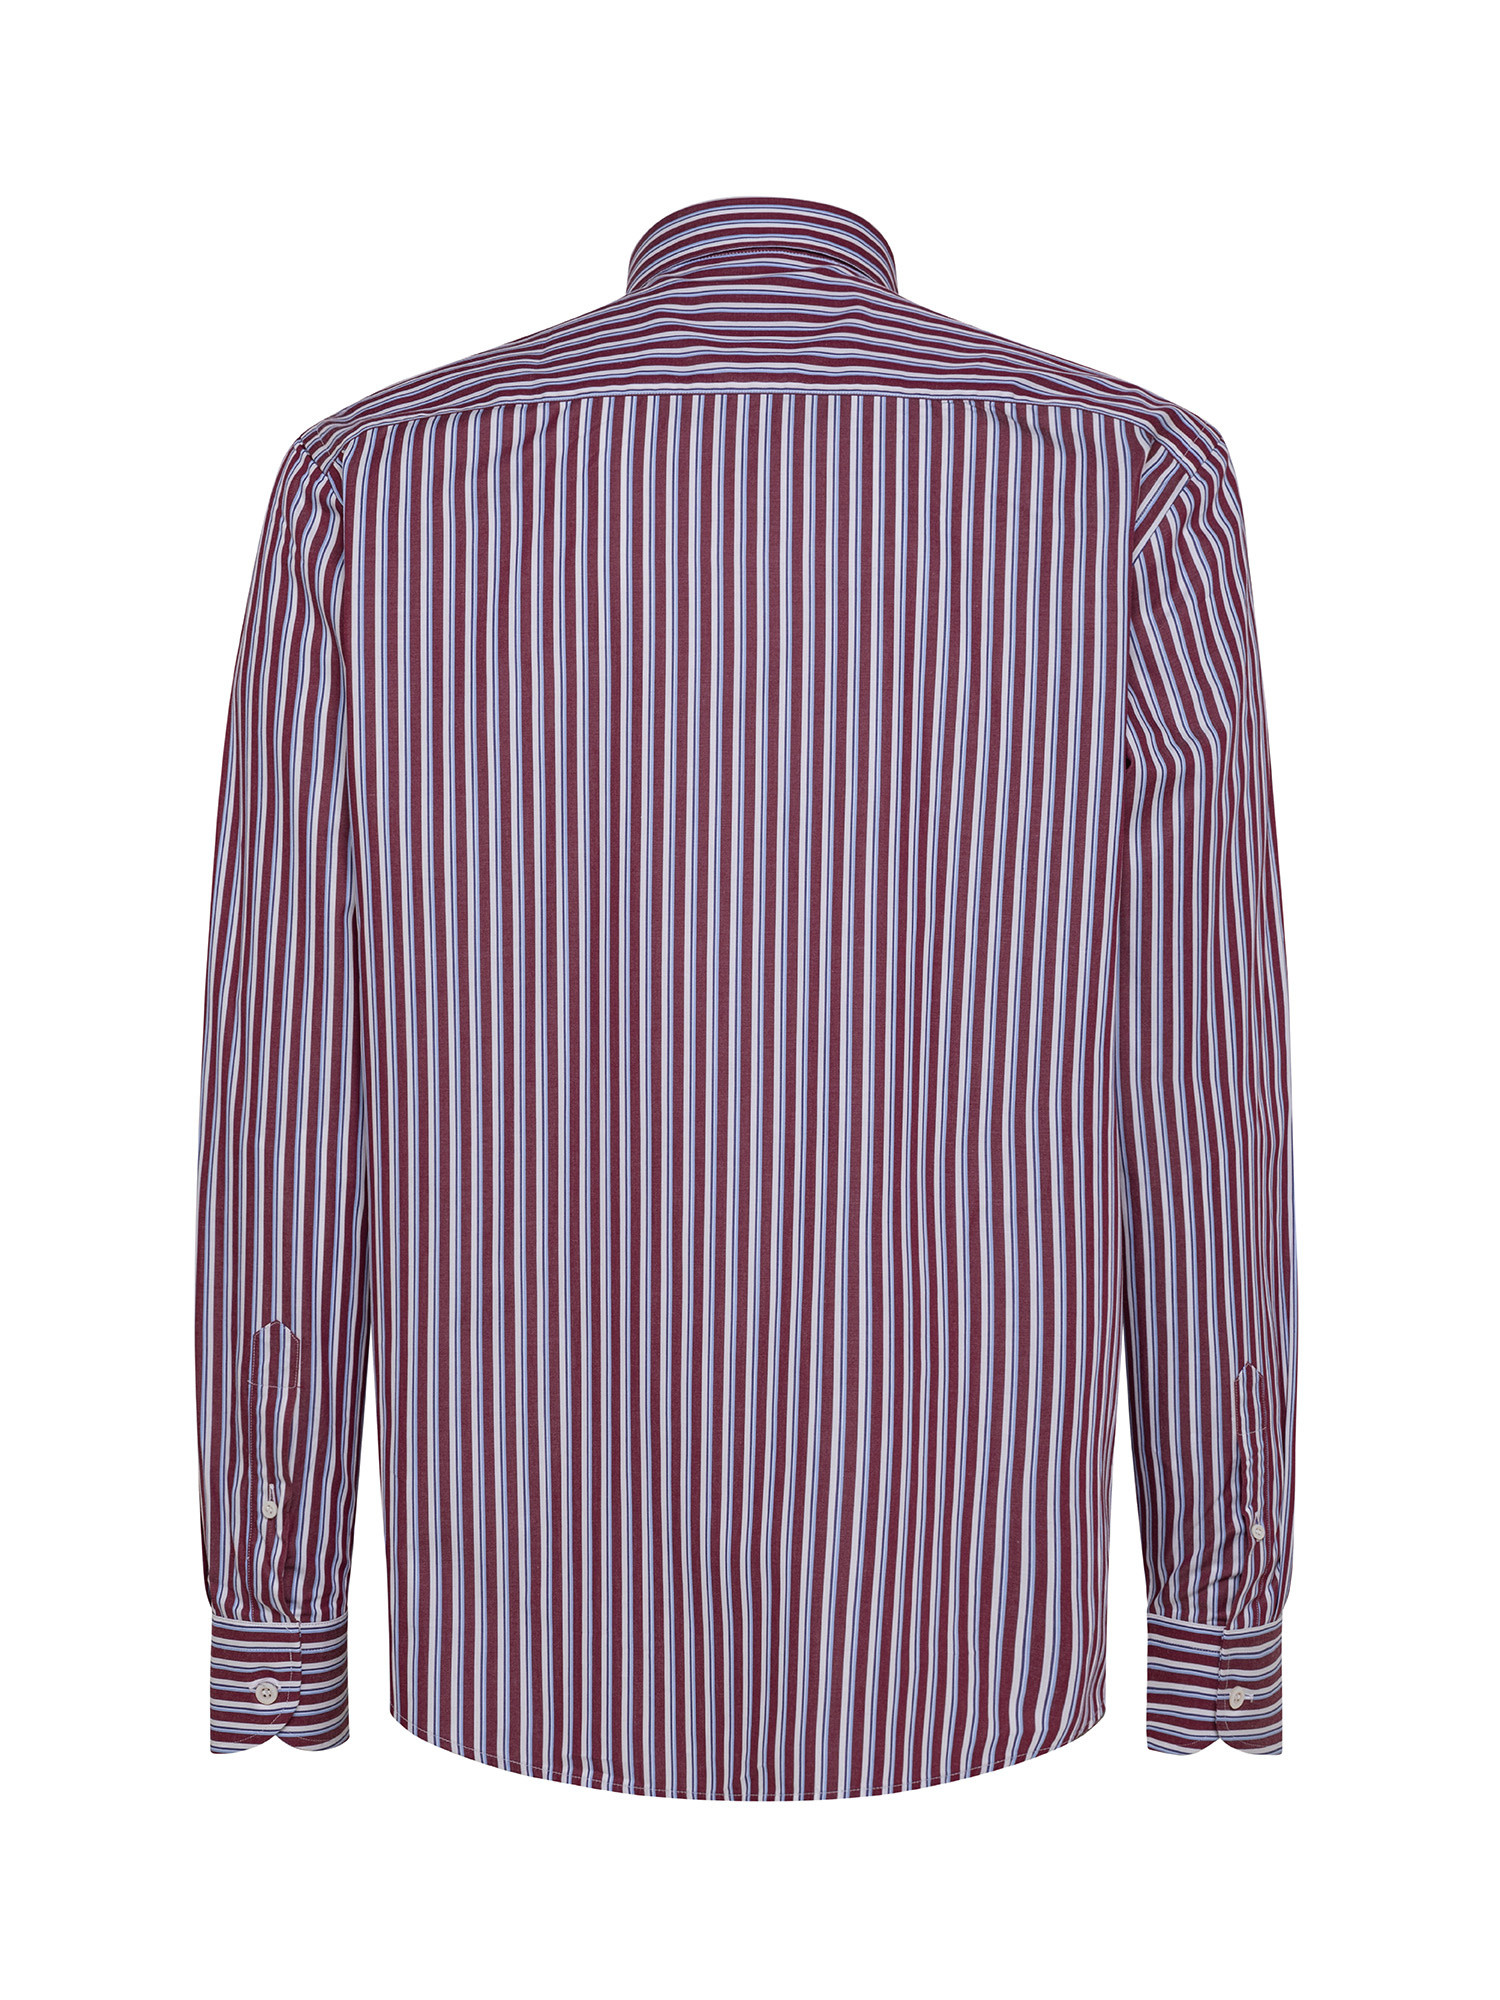 Luca D'Altieri - Camicia a righe tailor fit in puro cotone, Rosso bordeaux, large image number 2